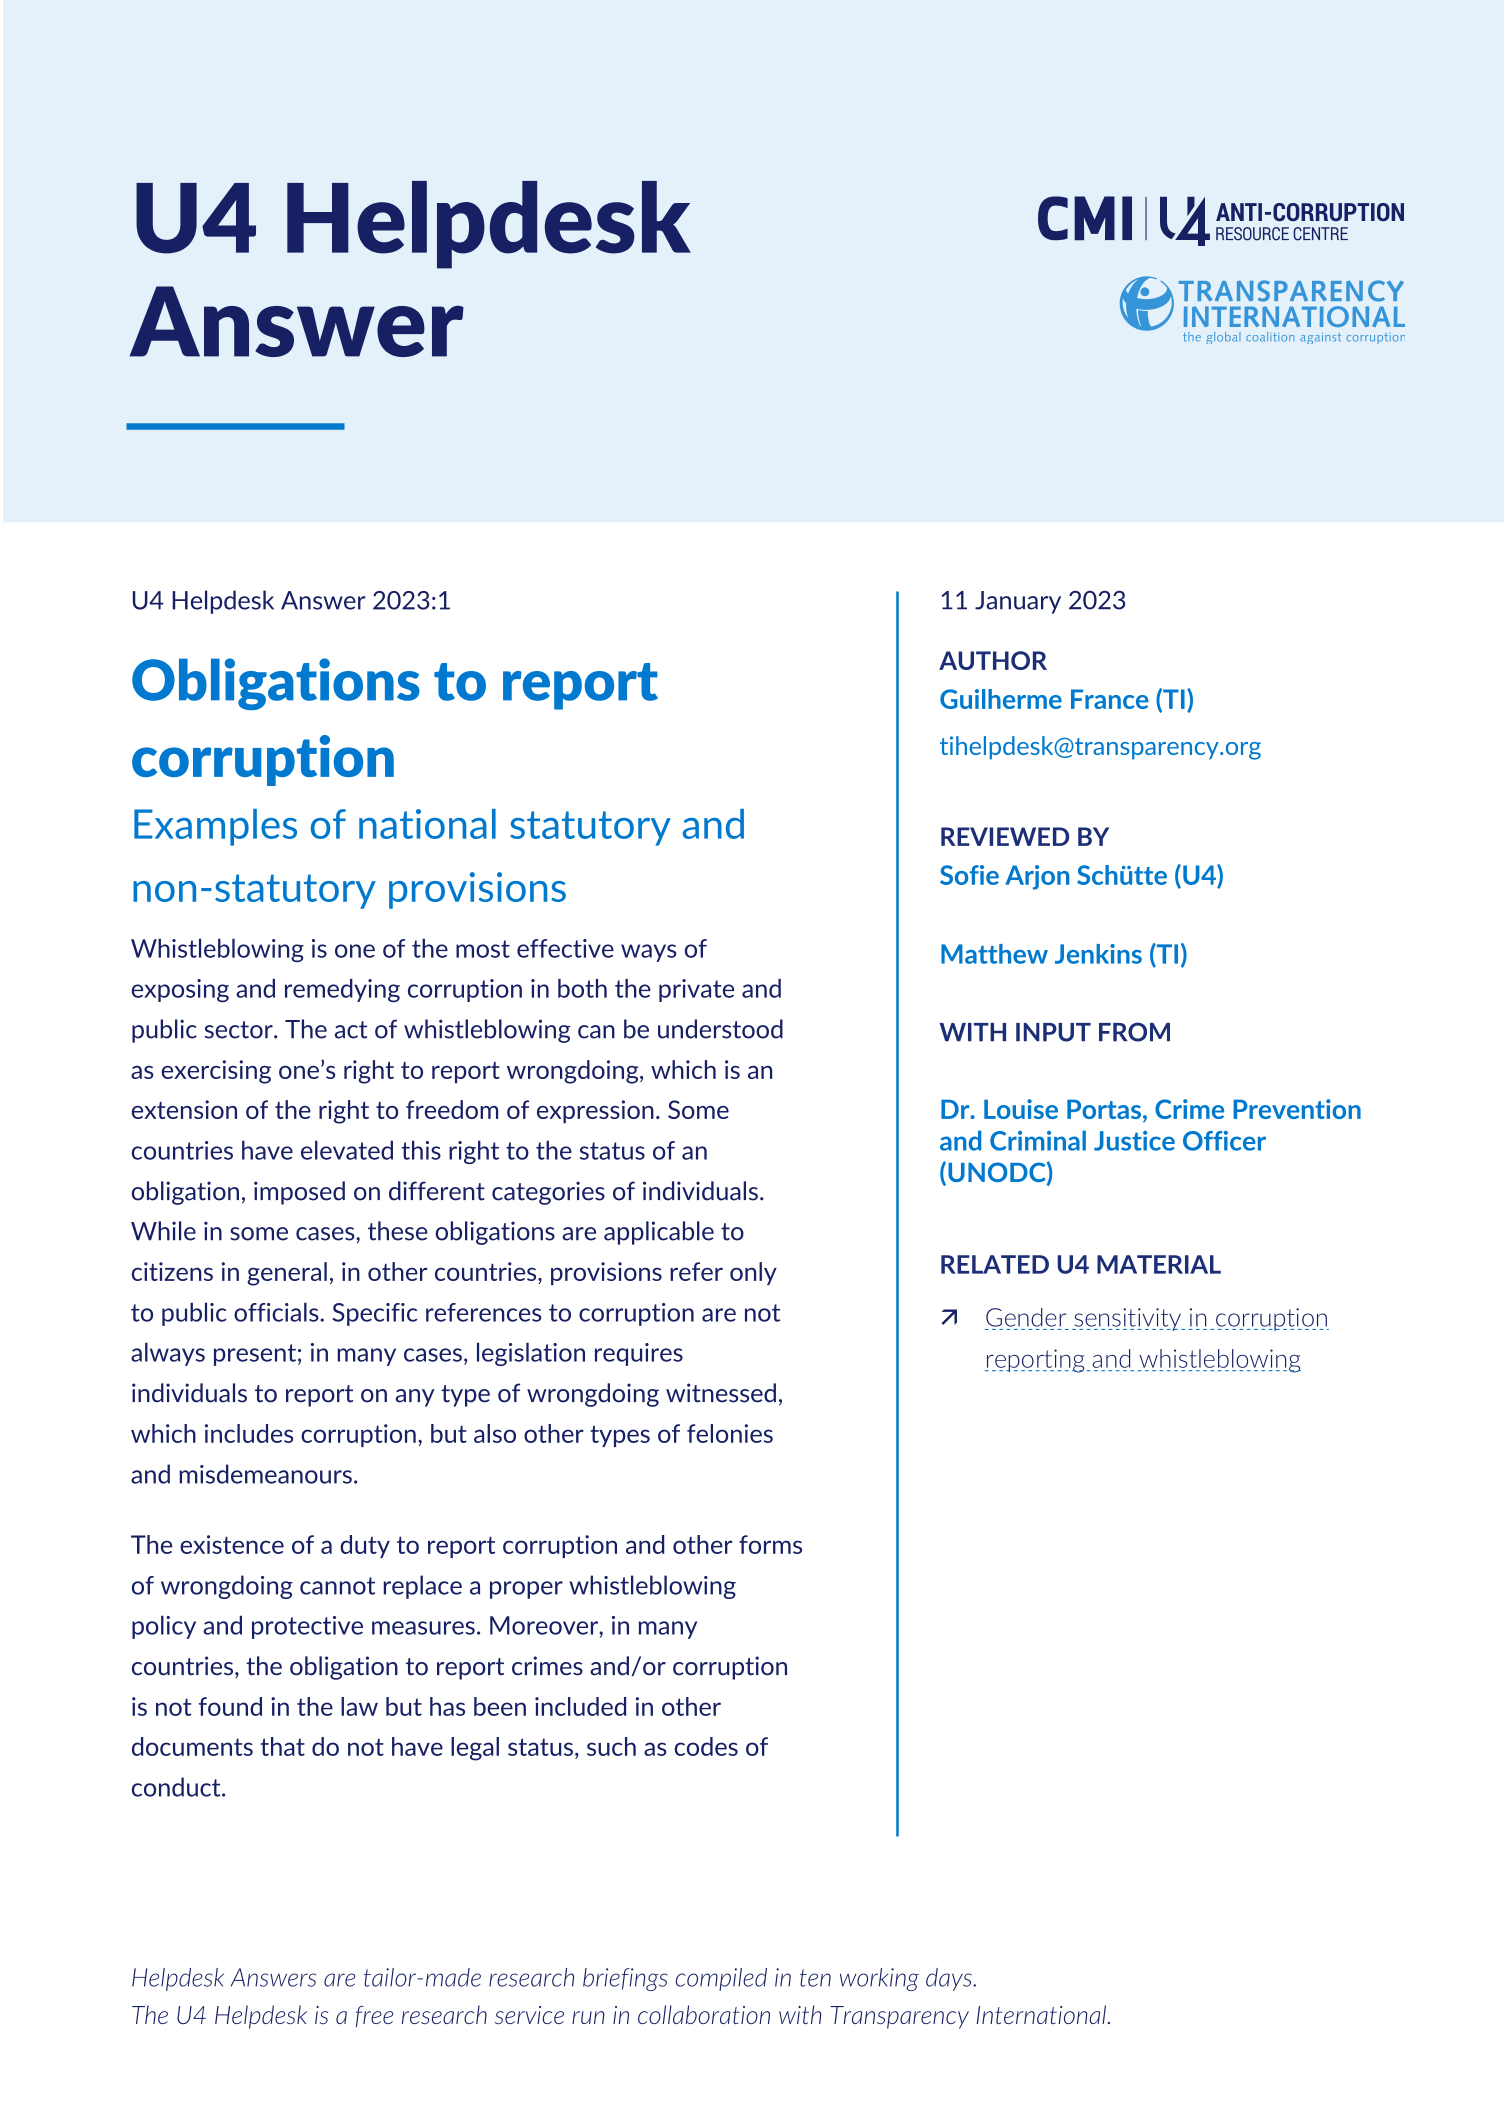 Obligations to report corruption